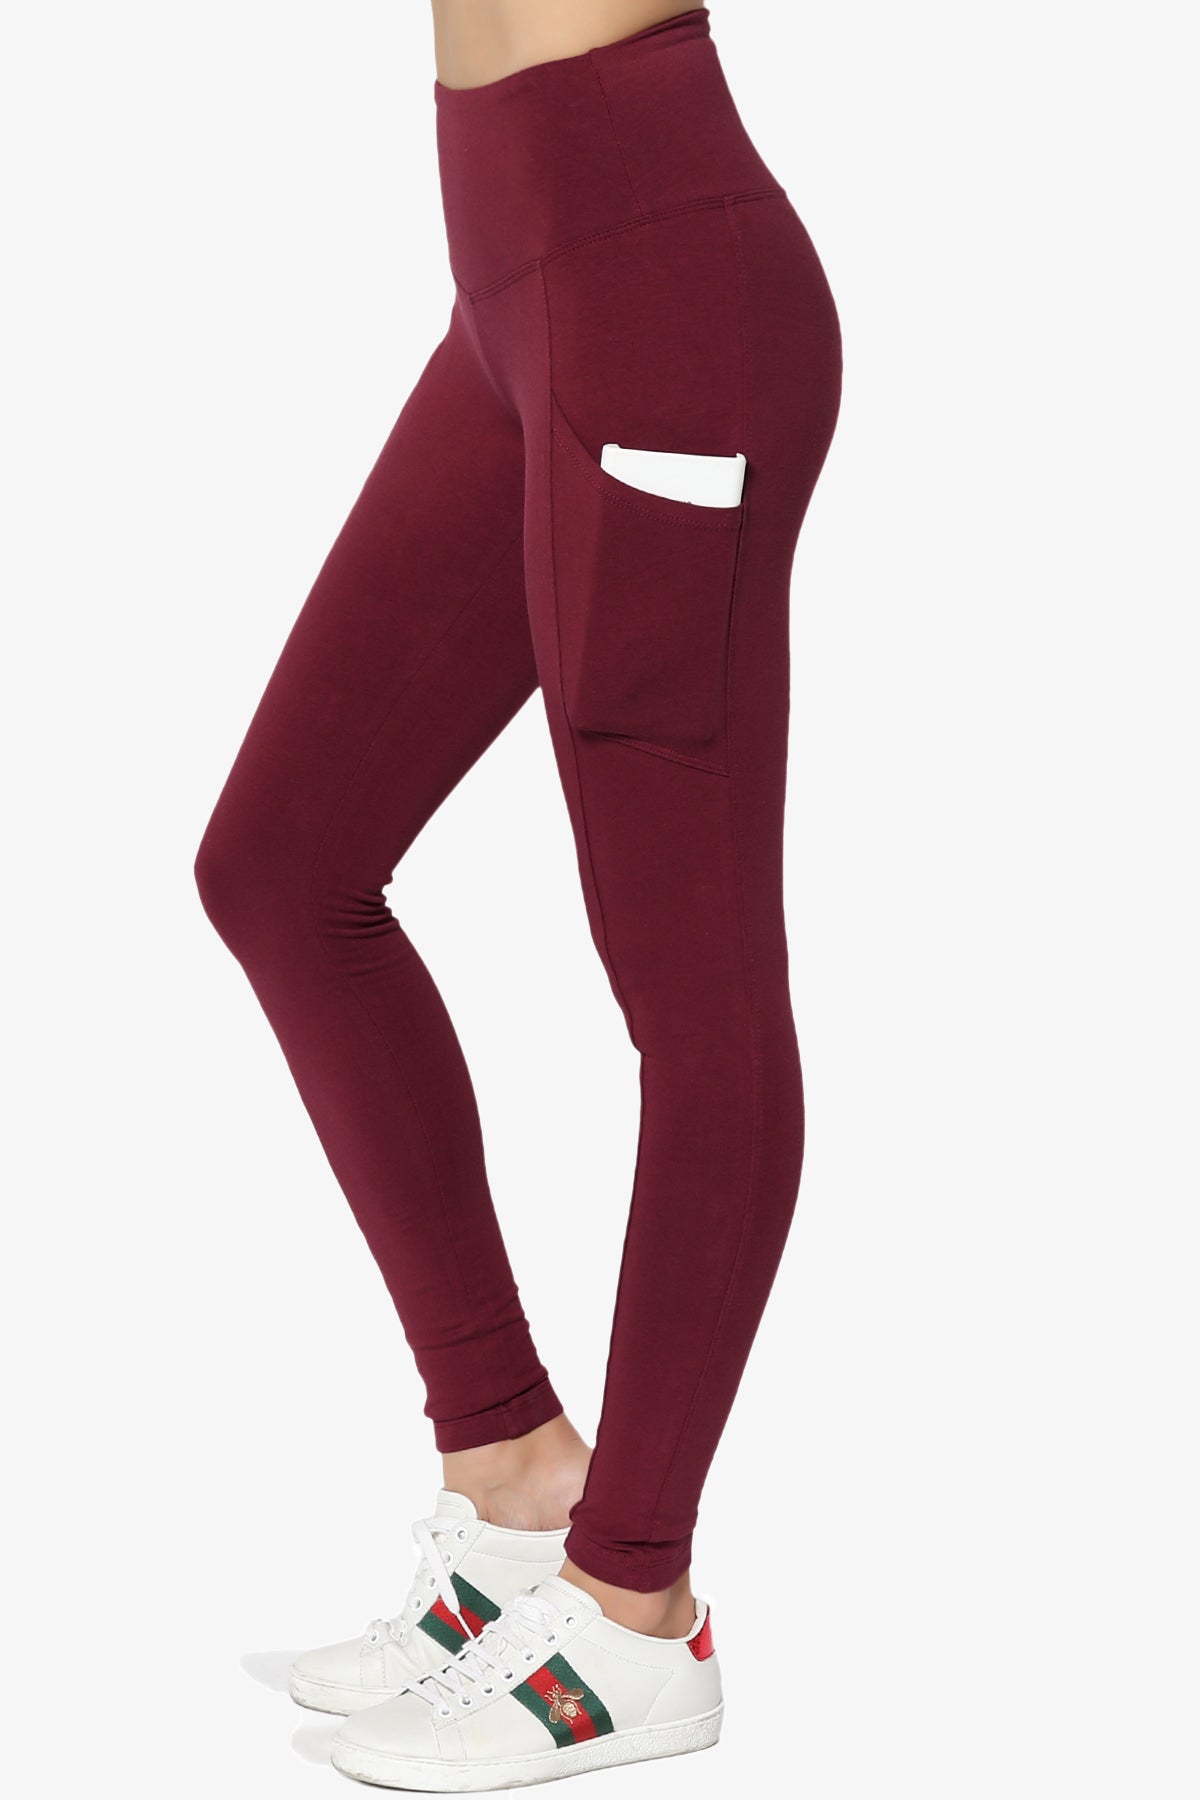 Load image into Gallery viewer, Ansley Luxe Cotton Leggings with Pockets DARK BURGUNDY_1
